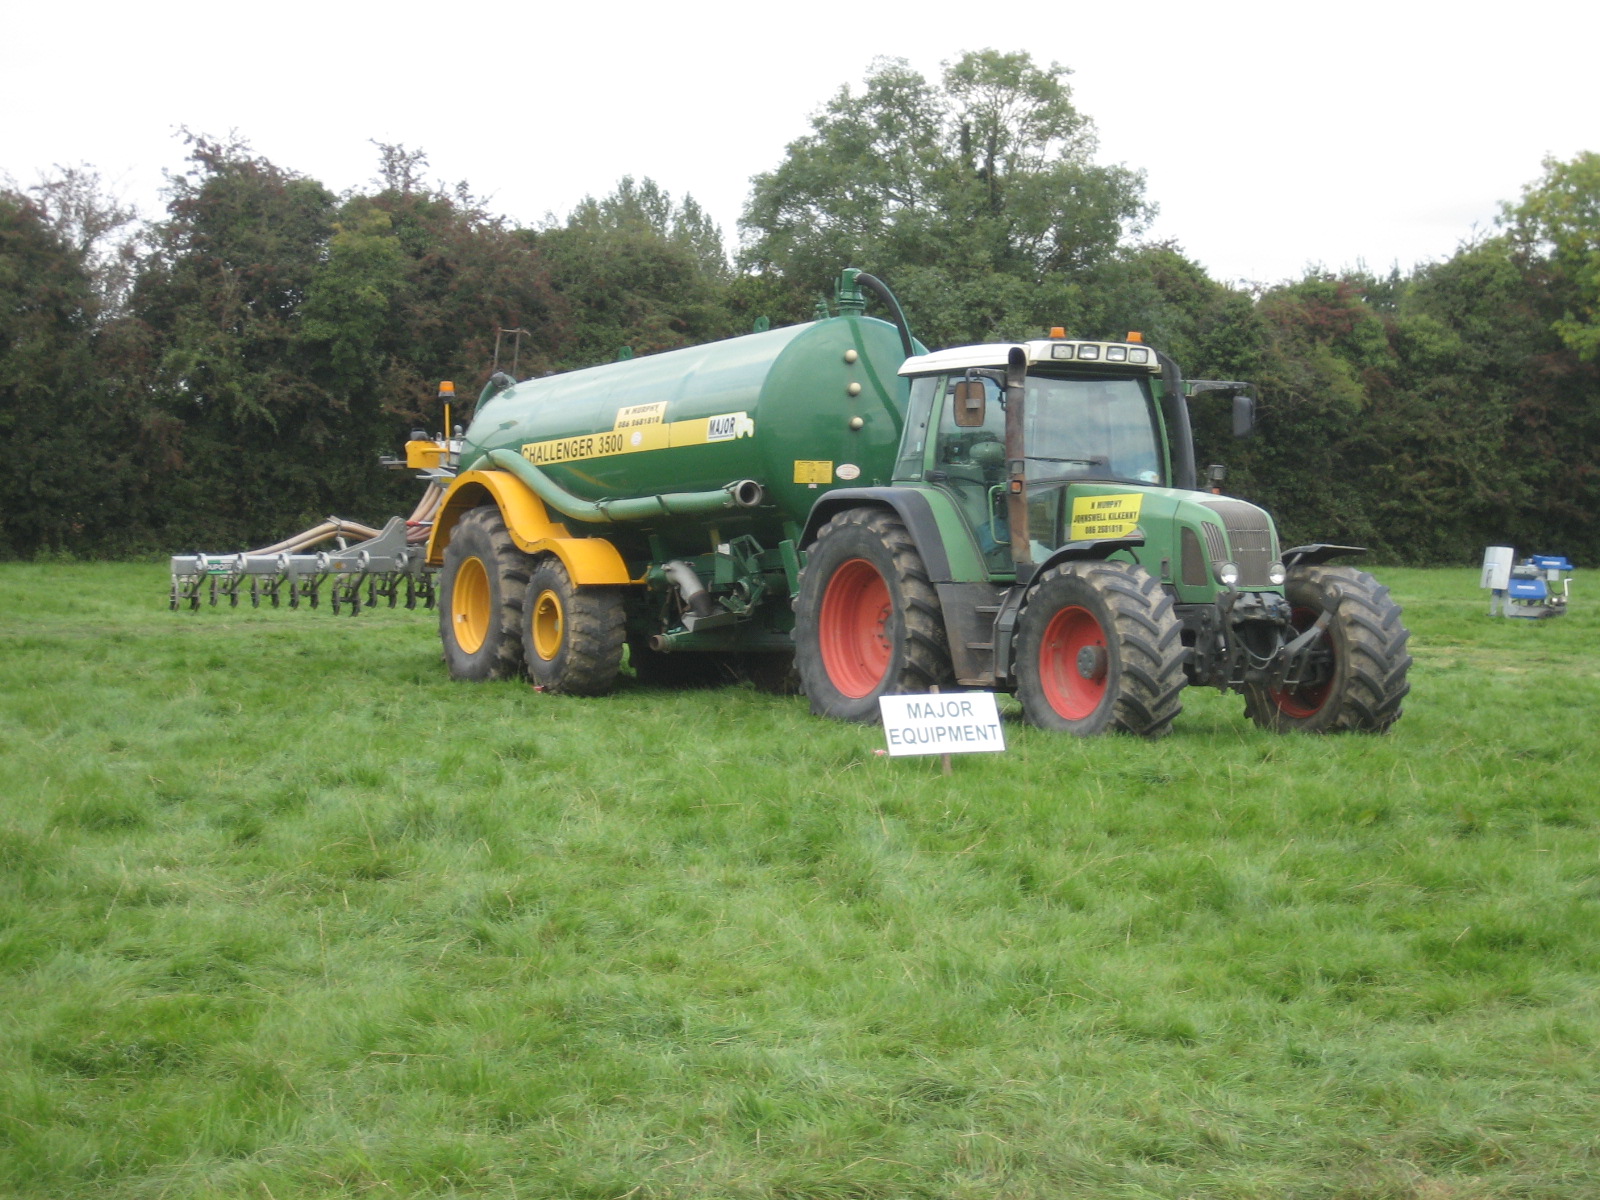 a tractor with some large tires parked in the grass